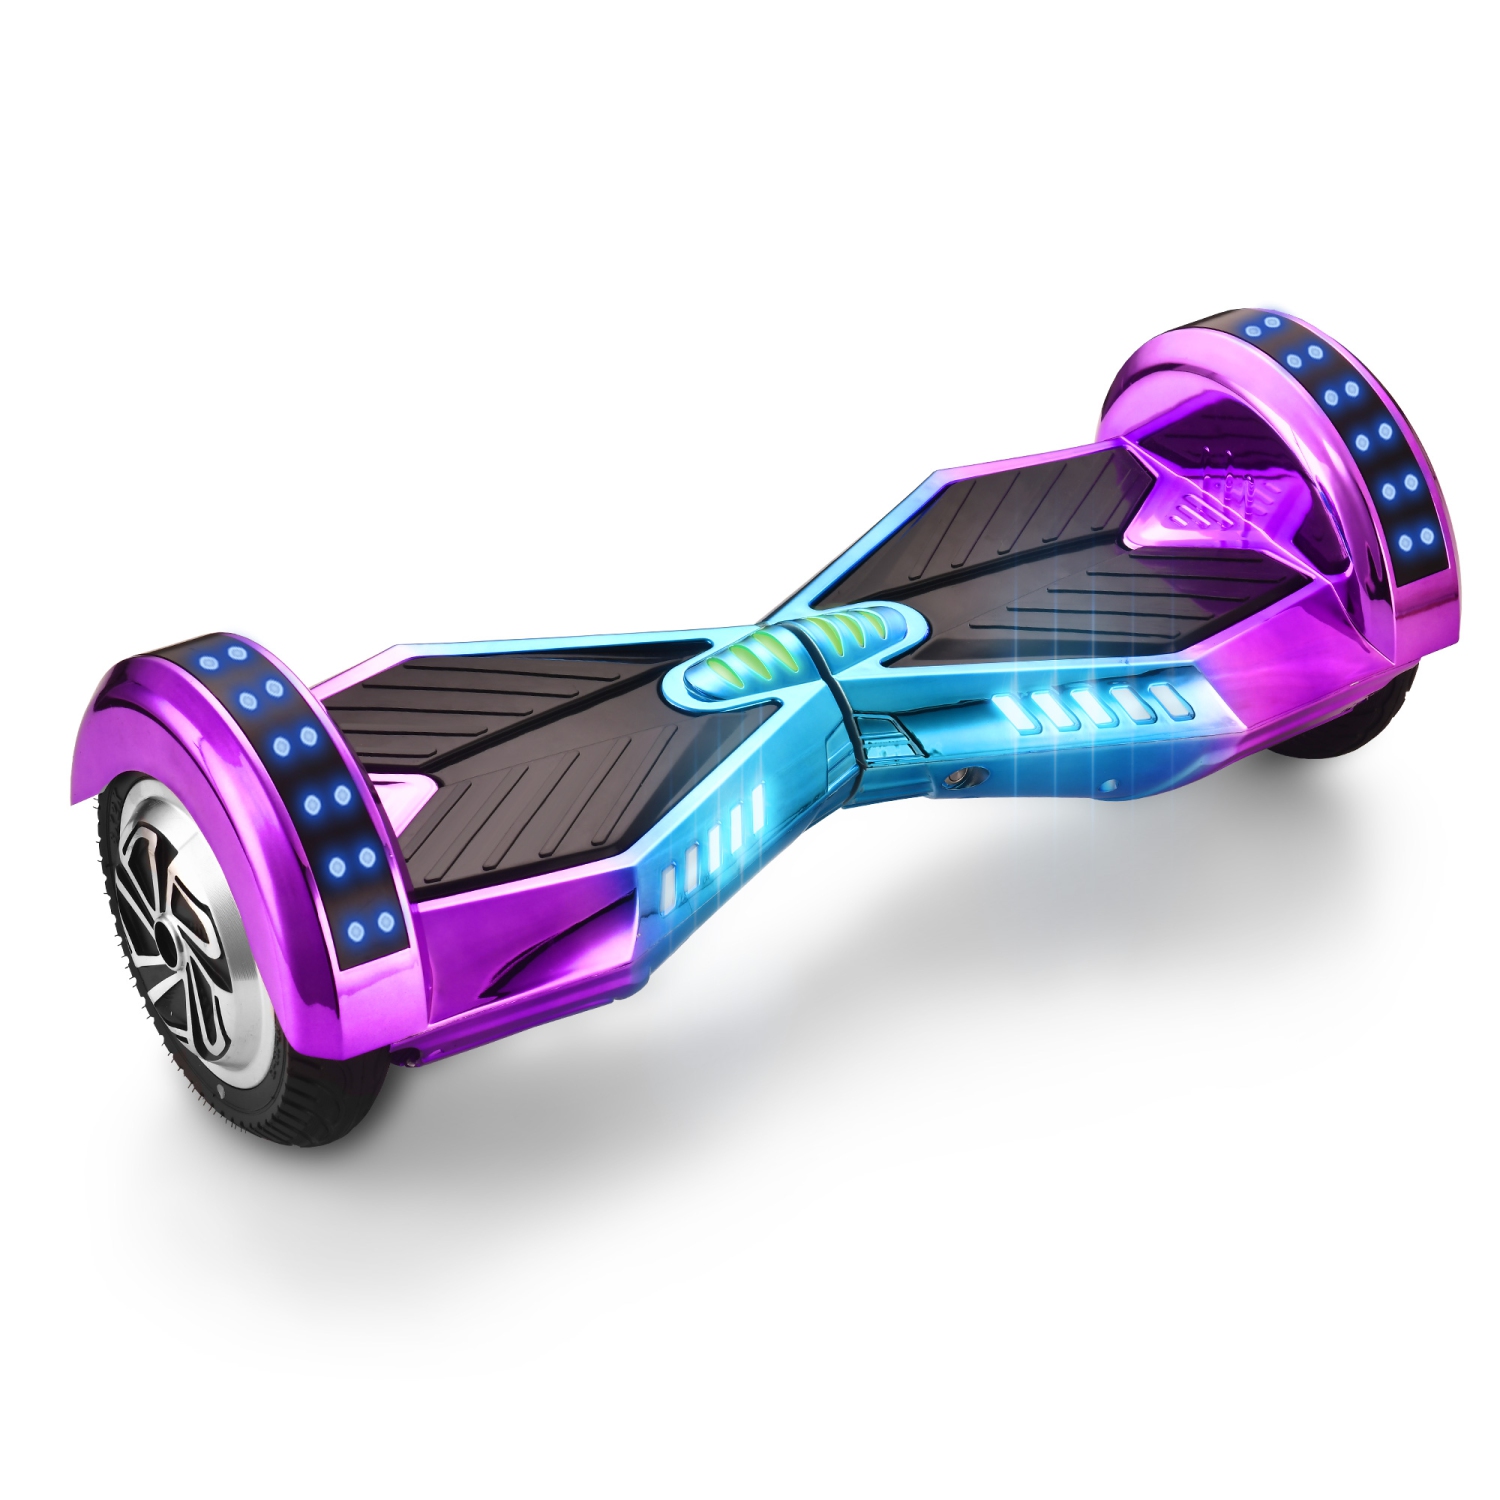 WEELMOTION 8" Chrome Iridescent Off-Road Hoverboard UL 2272 certified Hoverboard for Kids and Adults with LED lights and Music Speaker All Terrain Aluminum Wheel with free bag